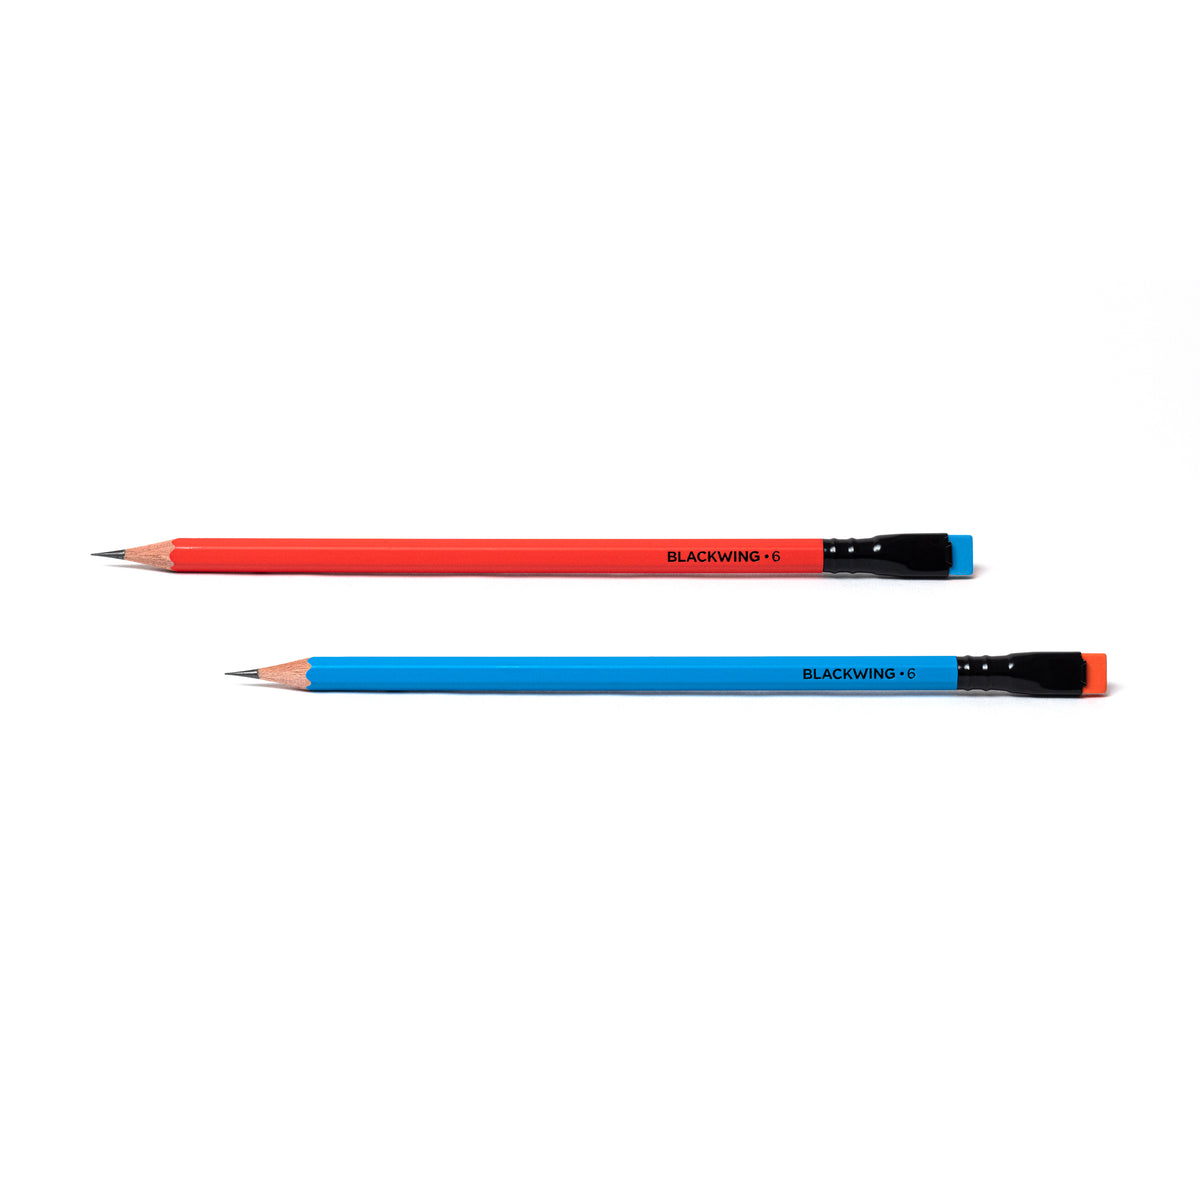 Two Blackwing Volume 6 (Set of 12) pencils on a white background complement each other perfectly.